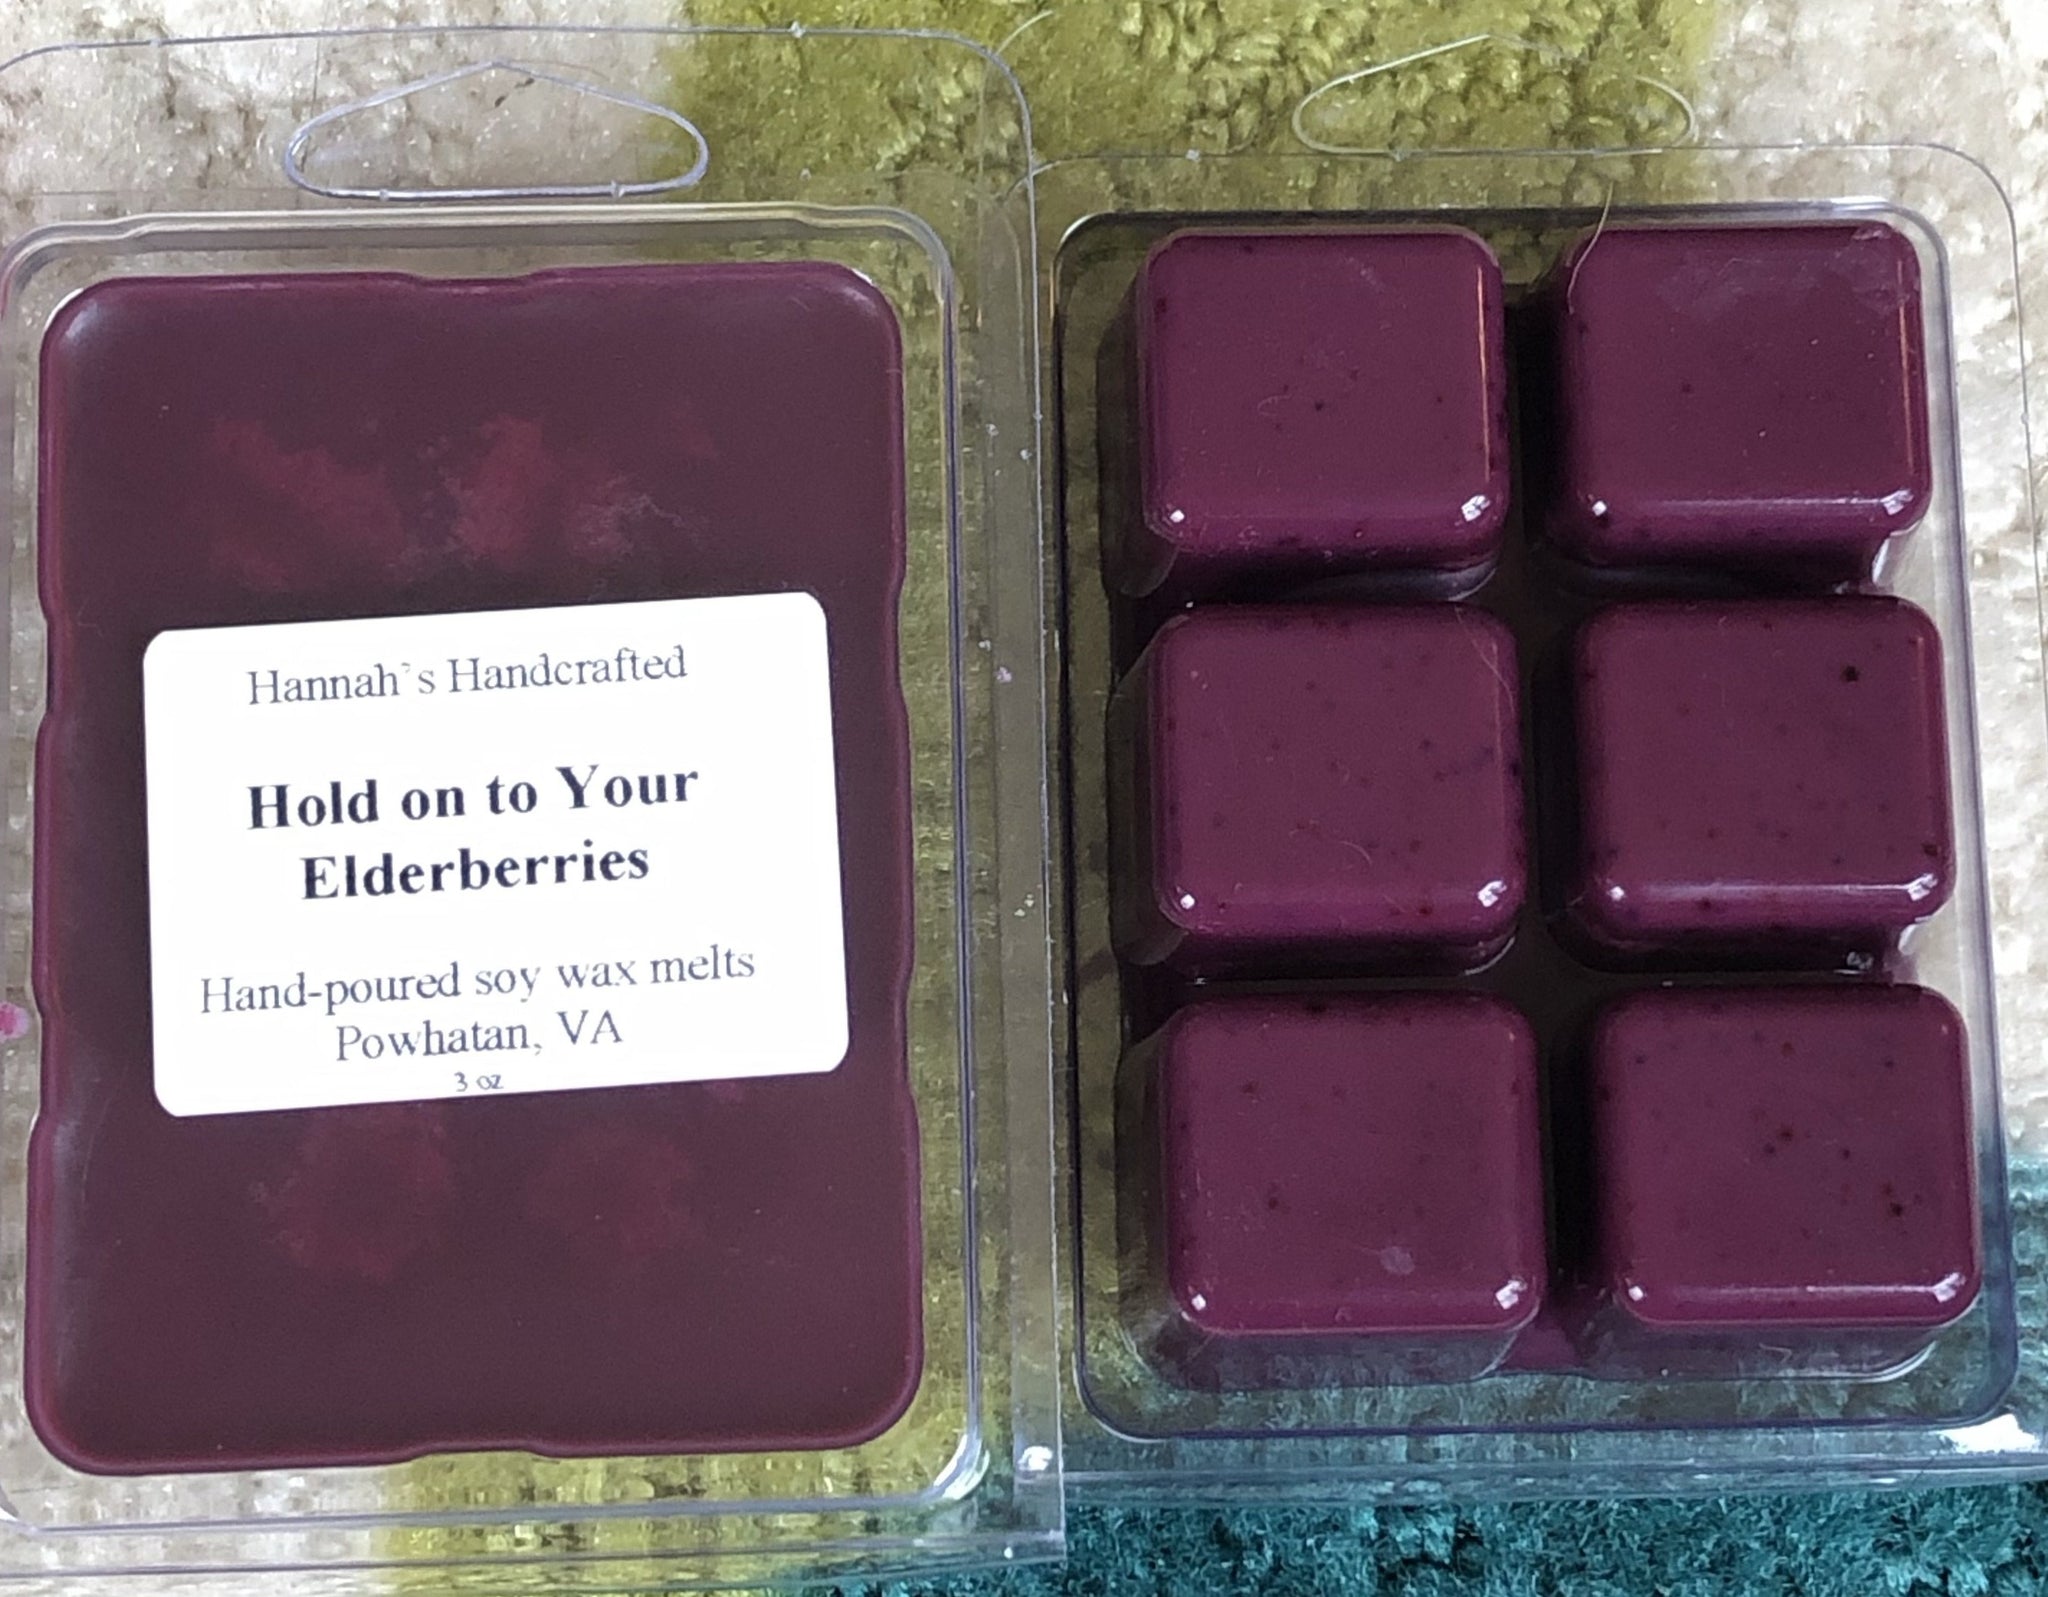 Two cases of wax melts. There are 6 melts in each container, both dark purple in color.